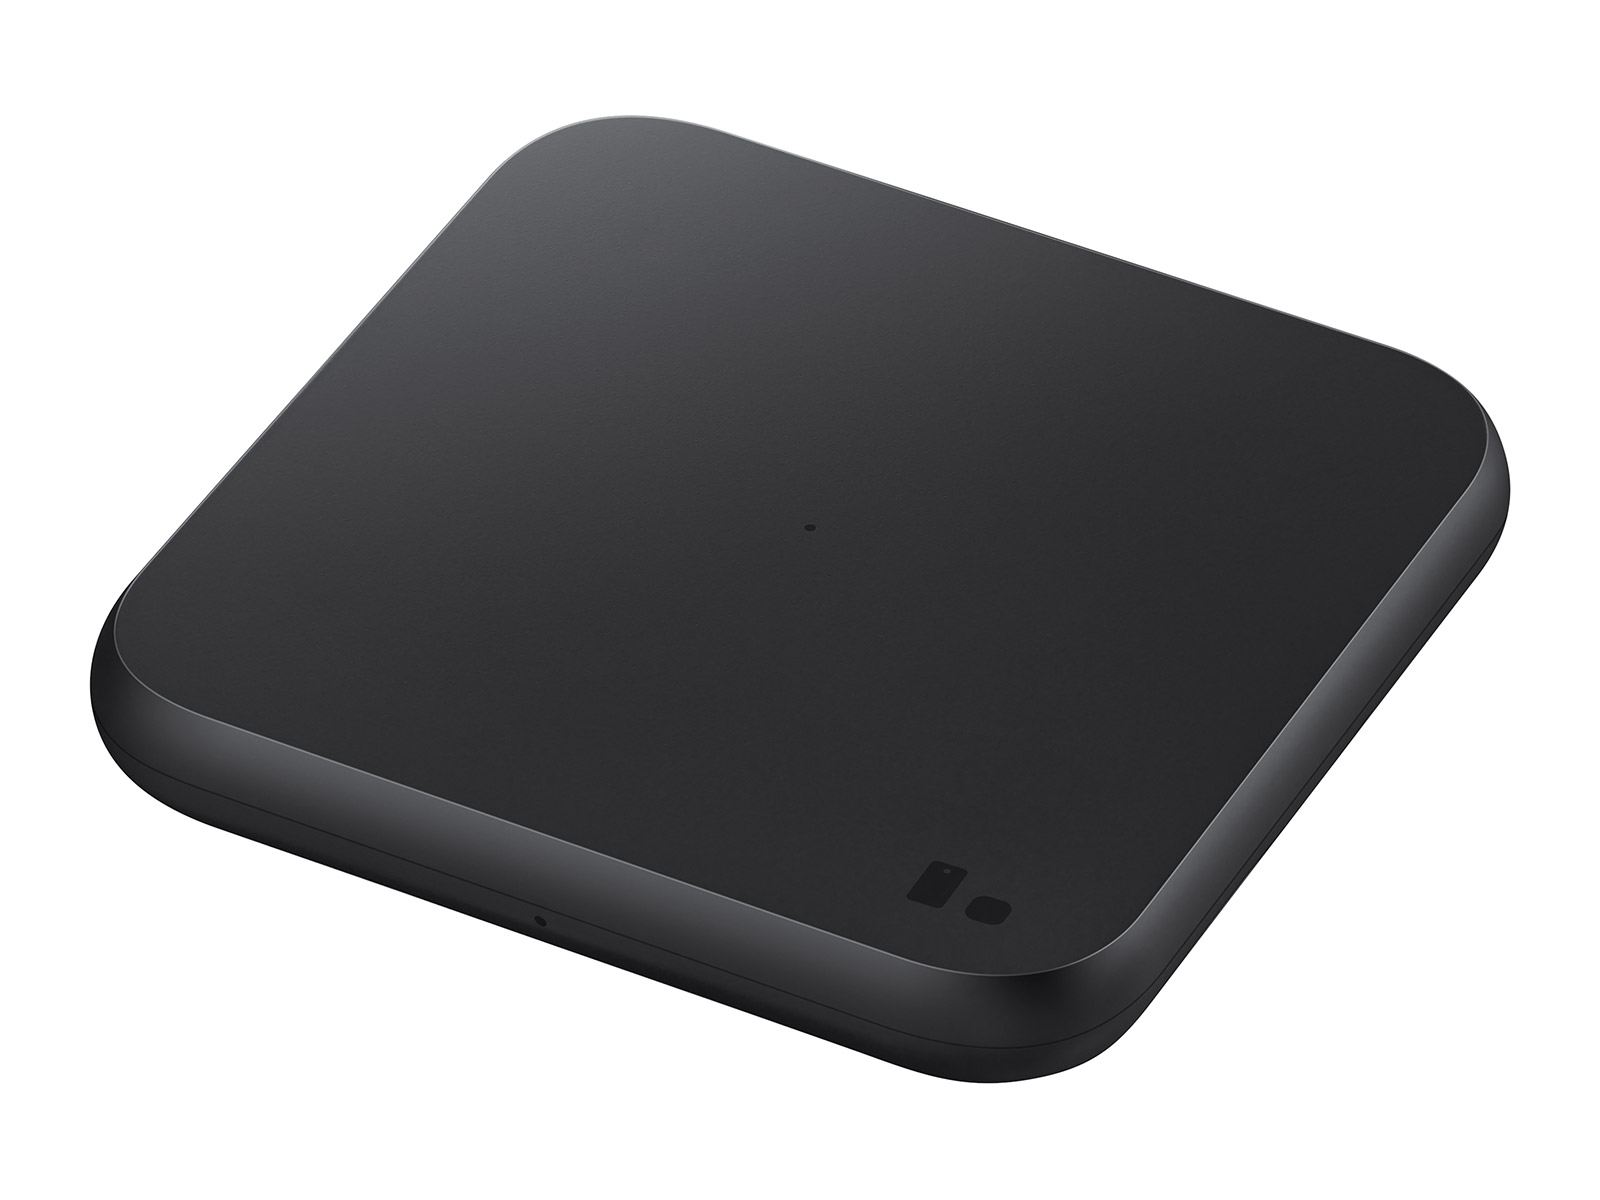 Wireless Charger, Black Mobile Accessories - EP-P1300TBEGUS